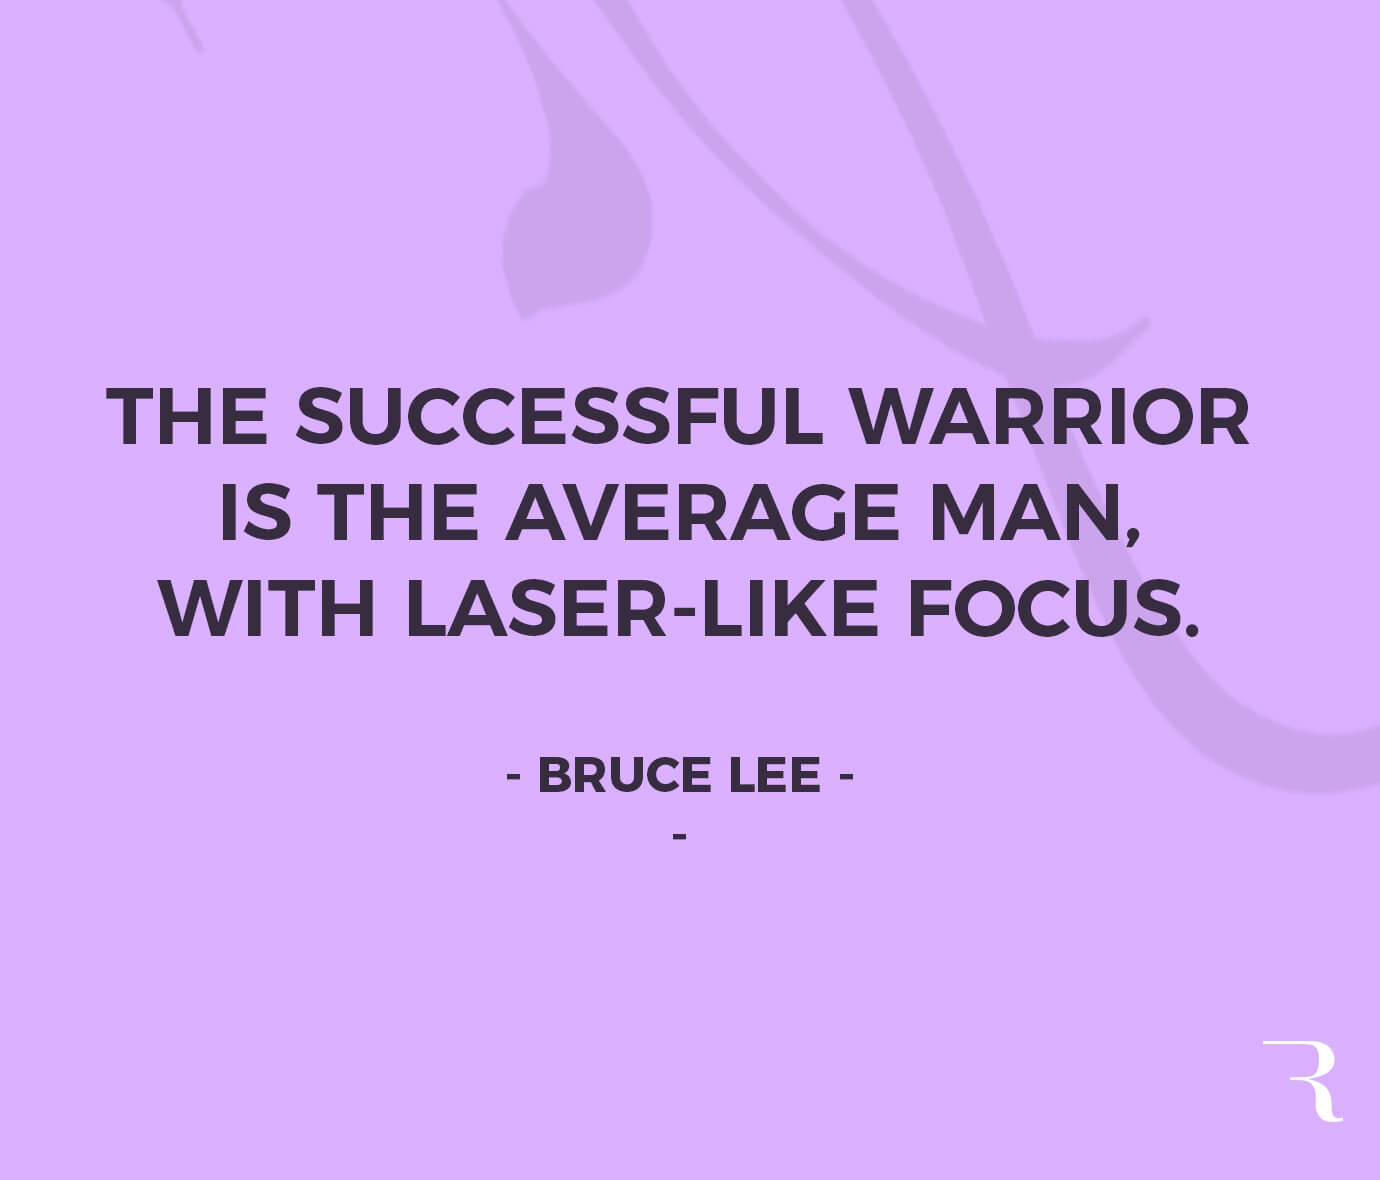 Motivational Quotes: "The successful warrior is the average man, with laser-like focus." 112 Motivational Quotes to Be a Better Entrepreneur